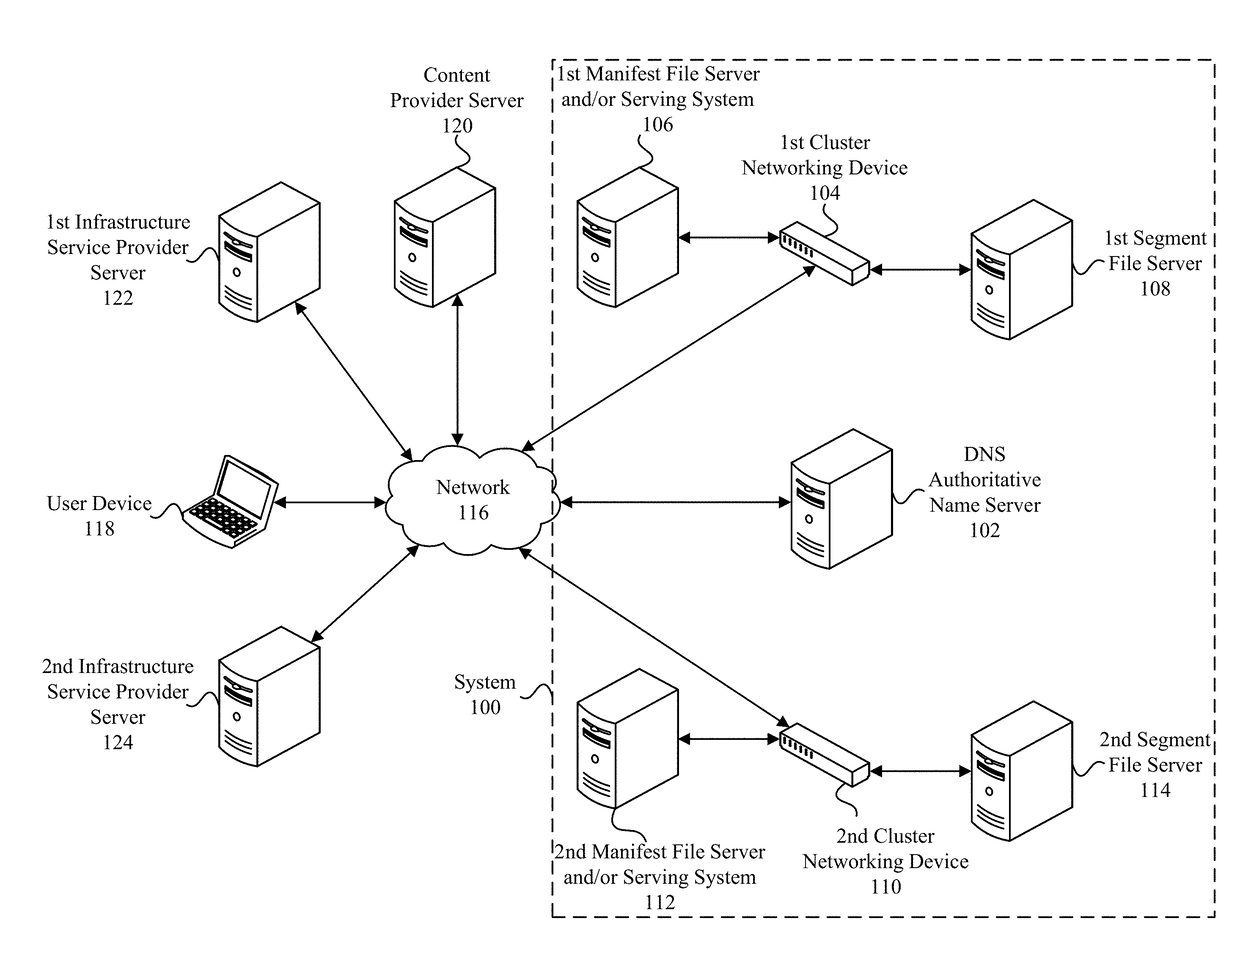 Generating and using manifest files including content delivery network authentication data